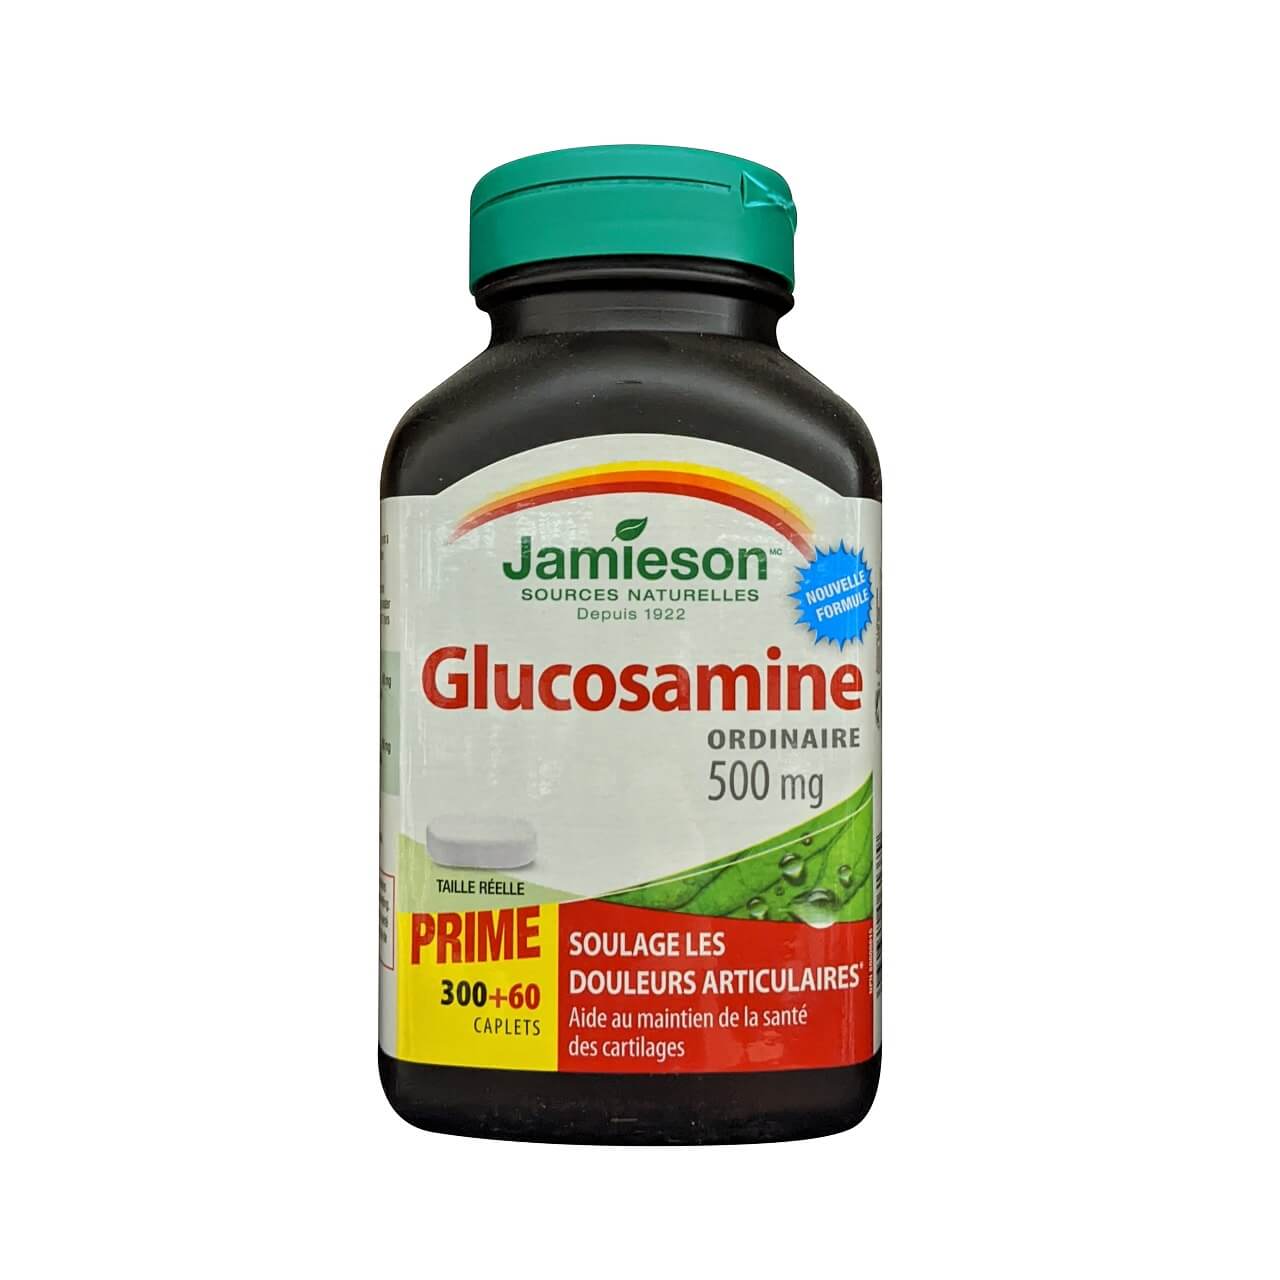 Product label for Jamieson Glucosamine 500 mg Regular Strength (360 caplets) in French